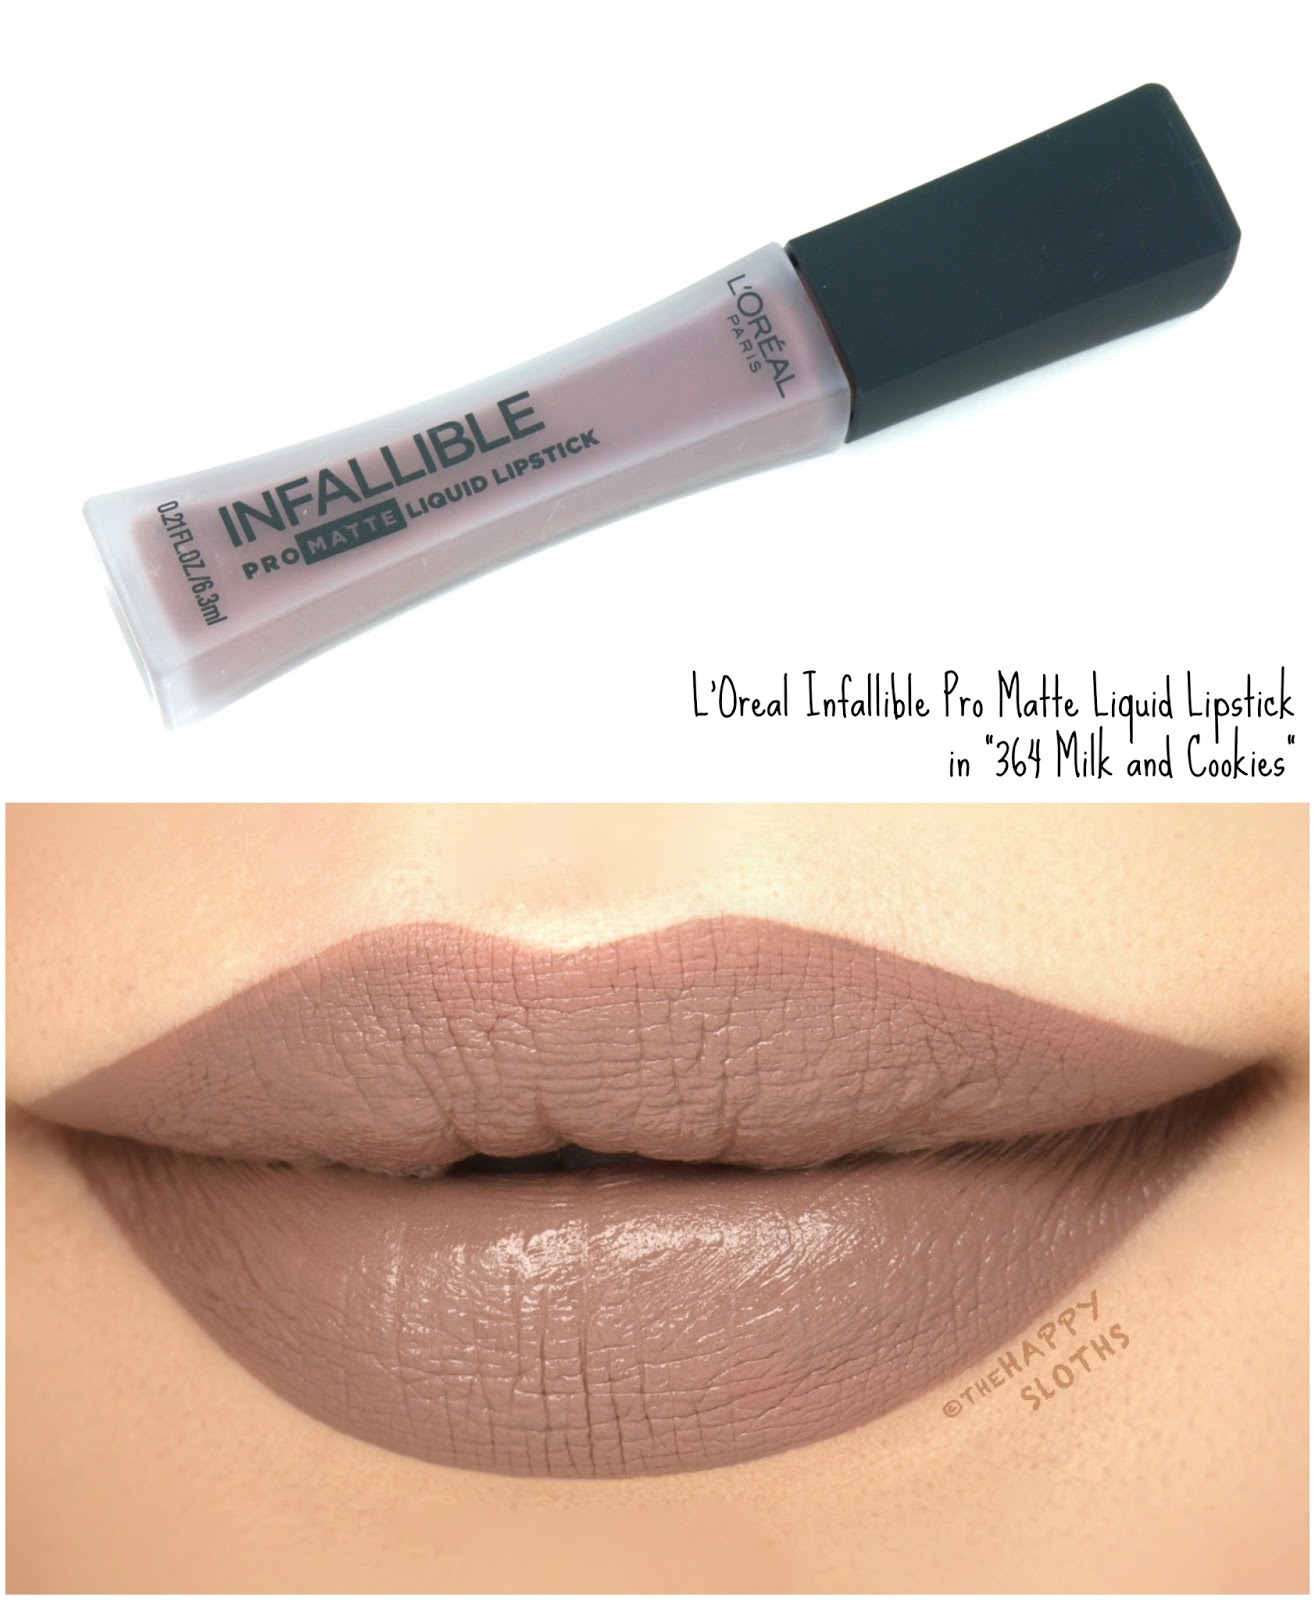 L'Oreal Infallible Pro Matte Liquid Lipsticks in "364 Milk and Cookies": Review and Swatches